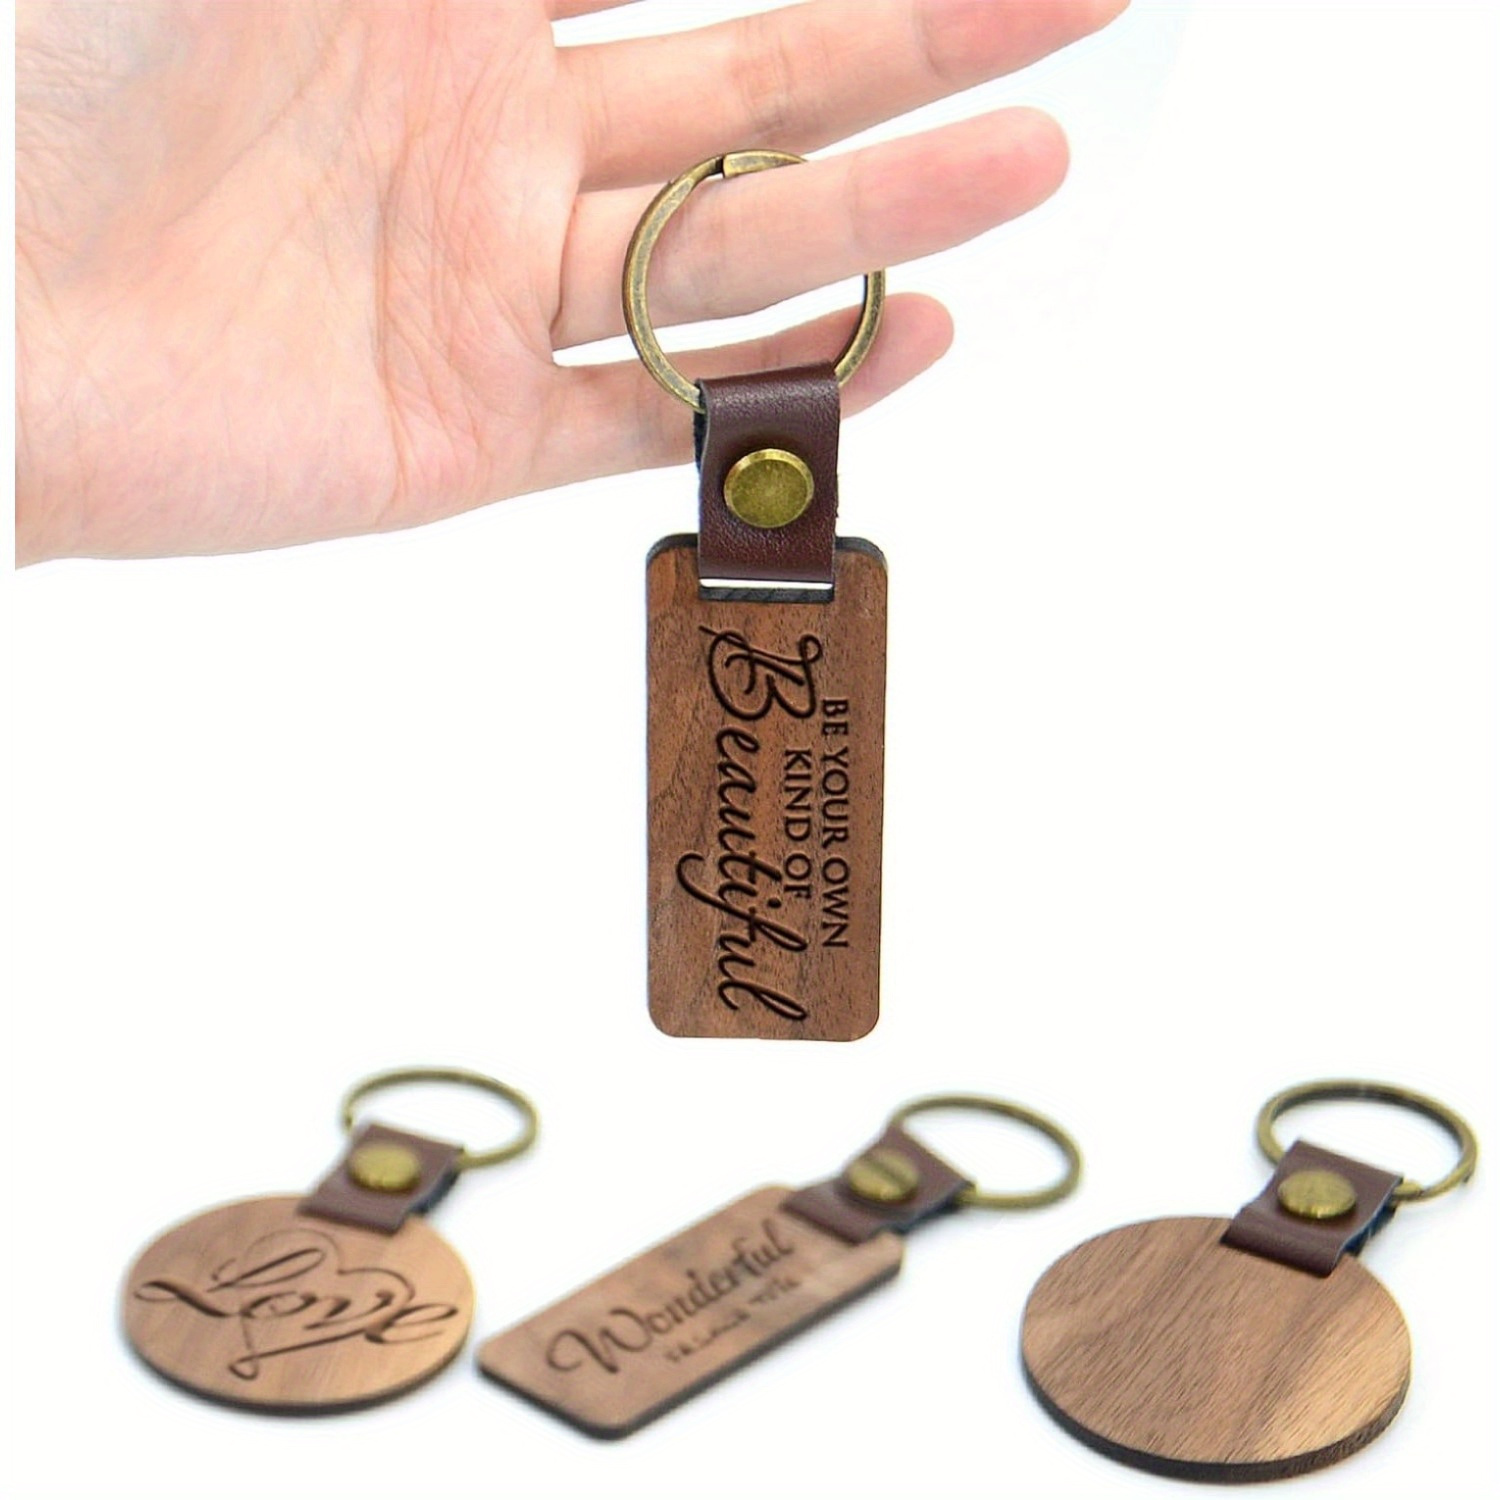 Custom Logo Leather Keychain With Laser Engraving And Walnut Maple Blank  Wood Wooden Keychain For Souvenir And Promotion From Winwindg2, $1.25